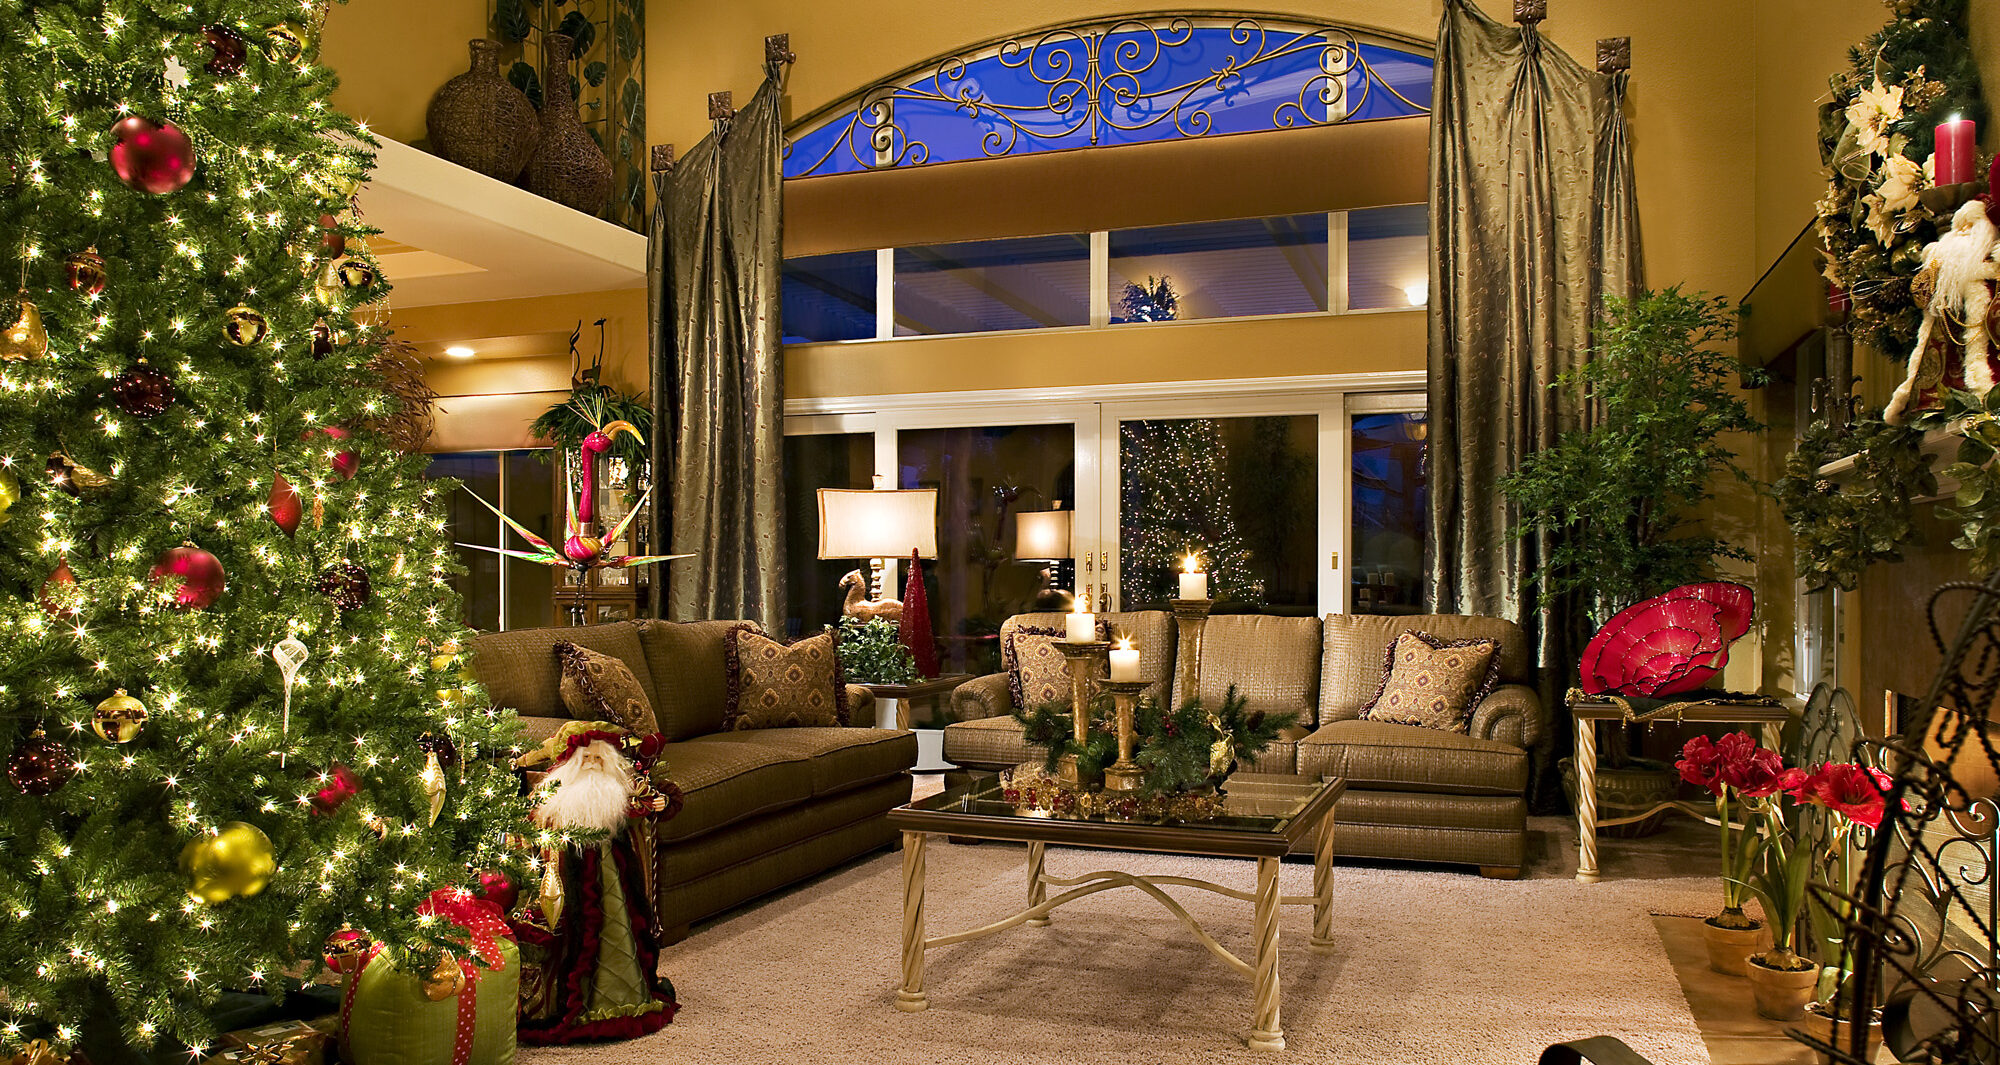 12 Days of Decorating for the Holidays